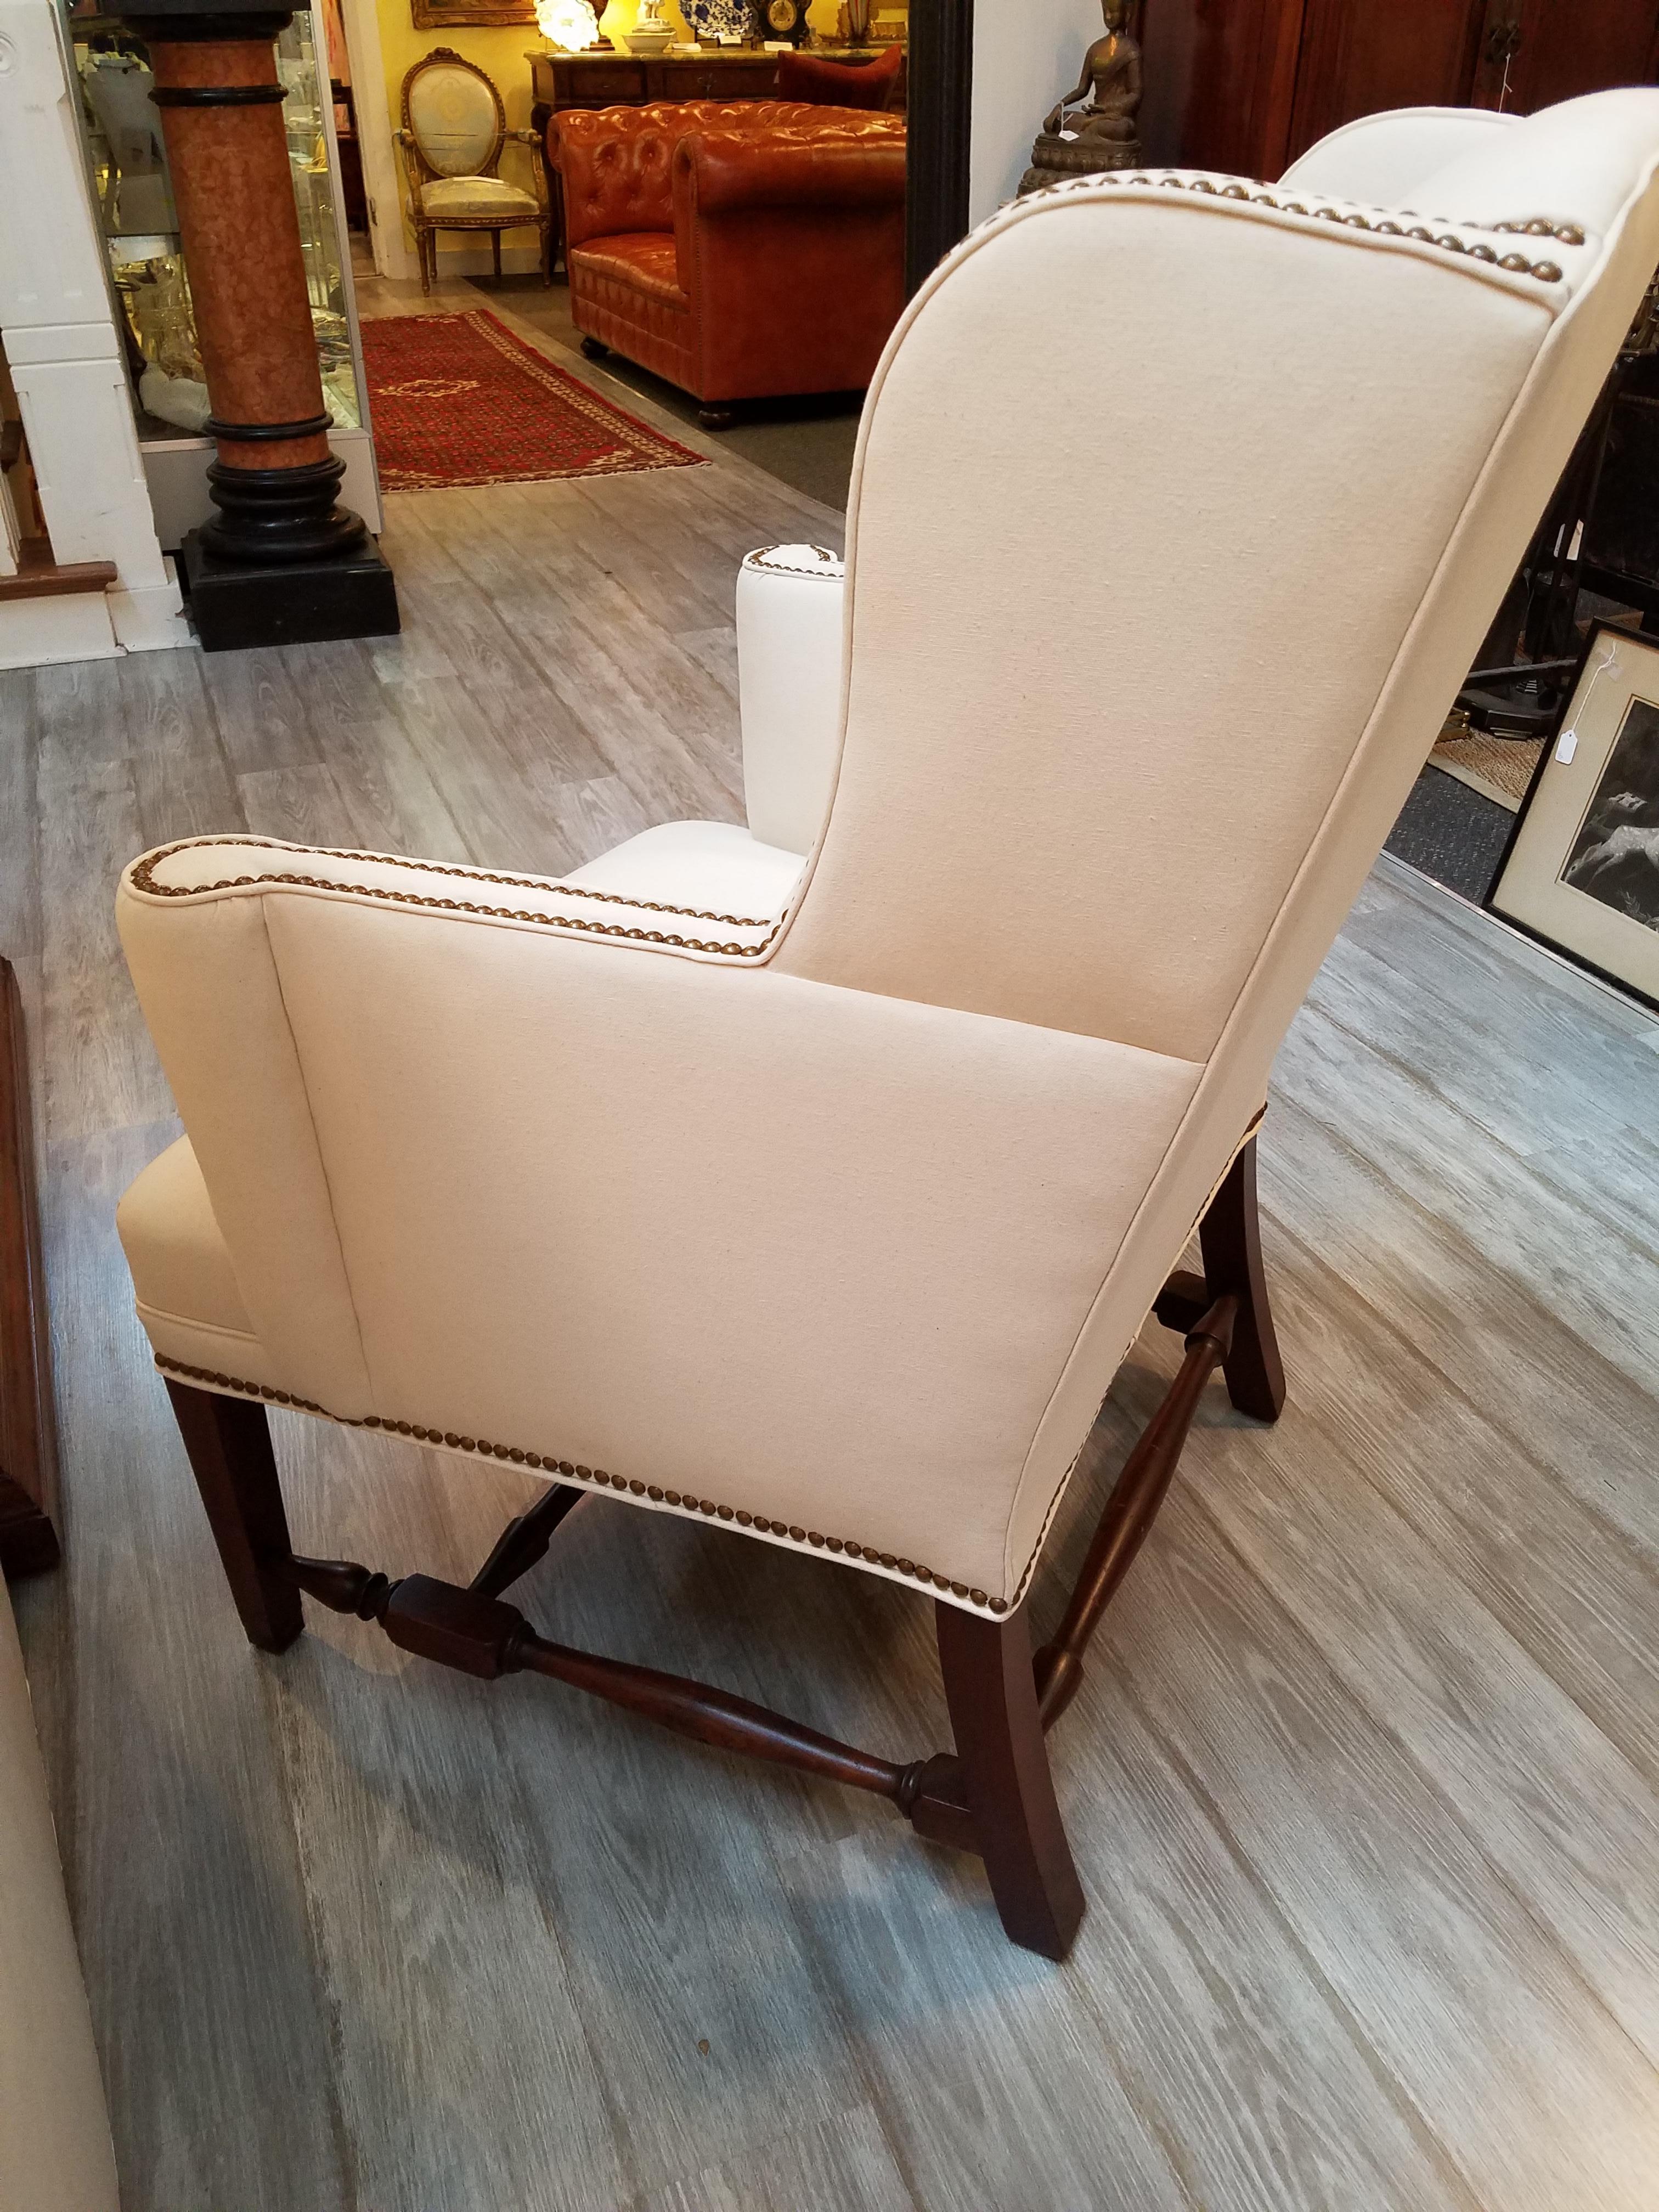 Classic American Wing chair with turned walnut stretchers. Highest quality solid wood frame with 8 way hand tied springs. Superior quality upholstery in new white duck fabric, circa 1900.
Measures: 32 W x 28 D x 41 H. Seat height 22.